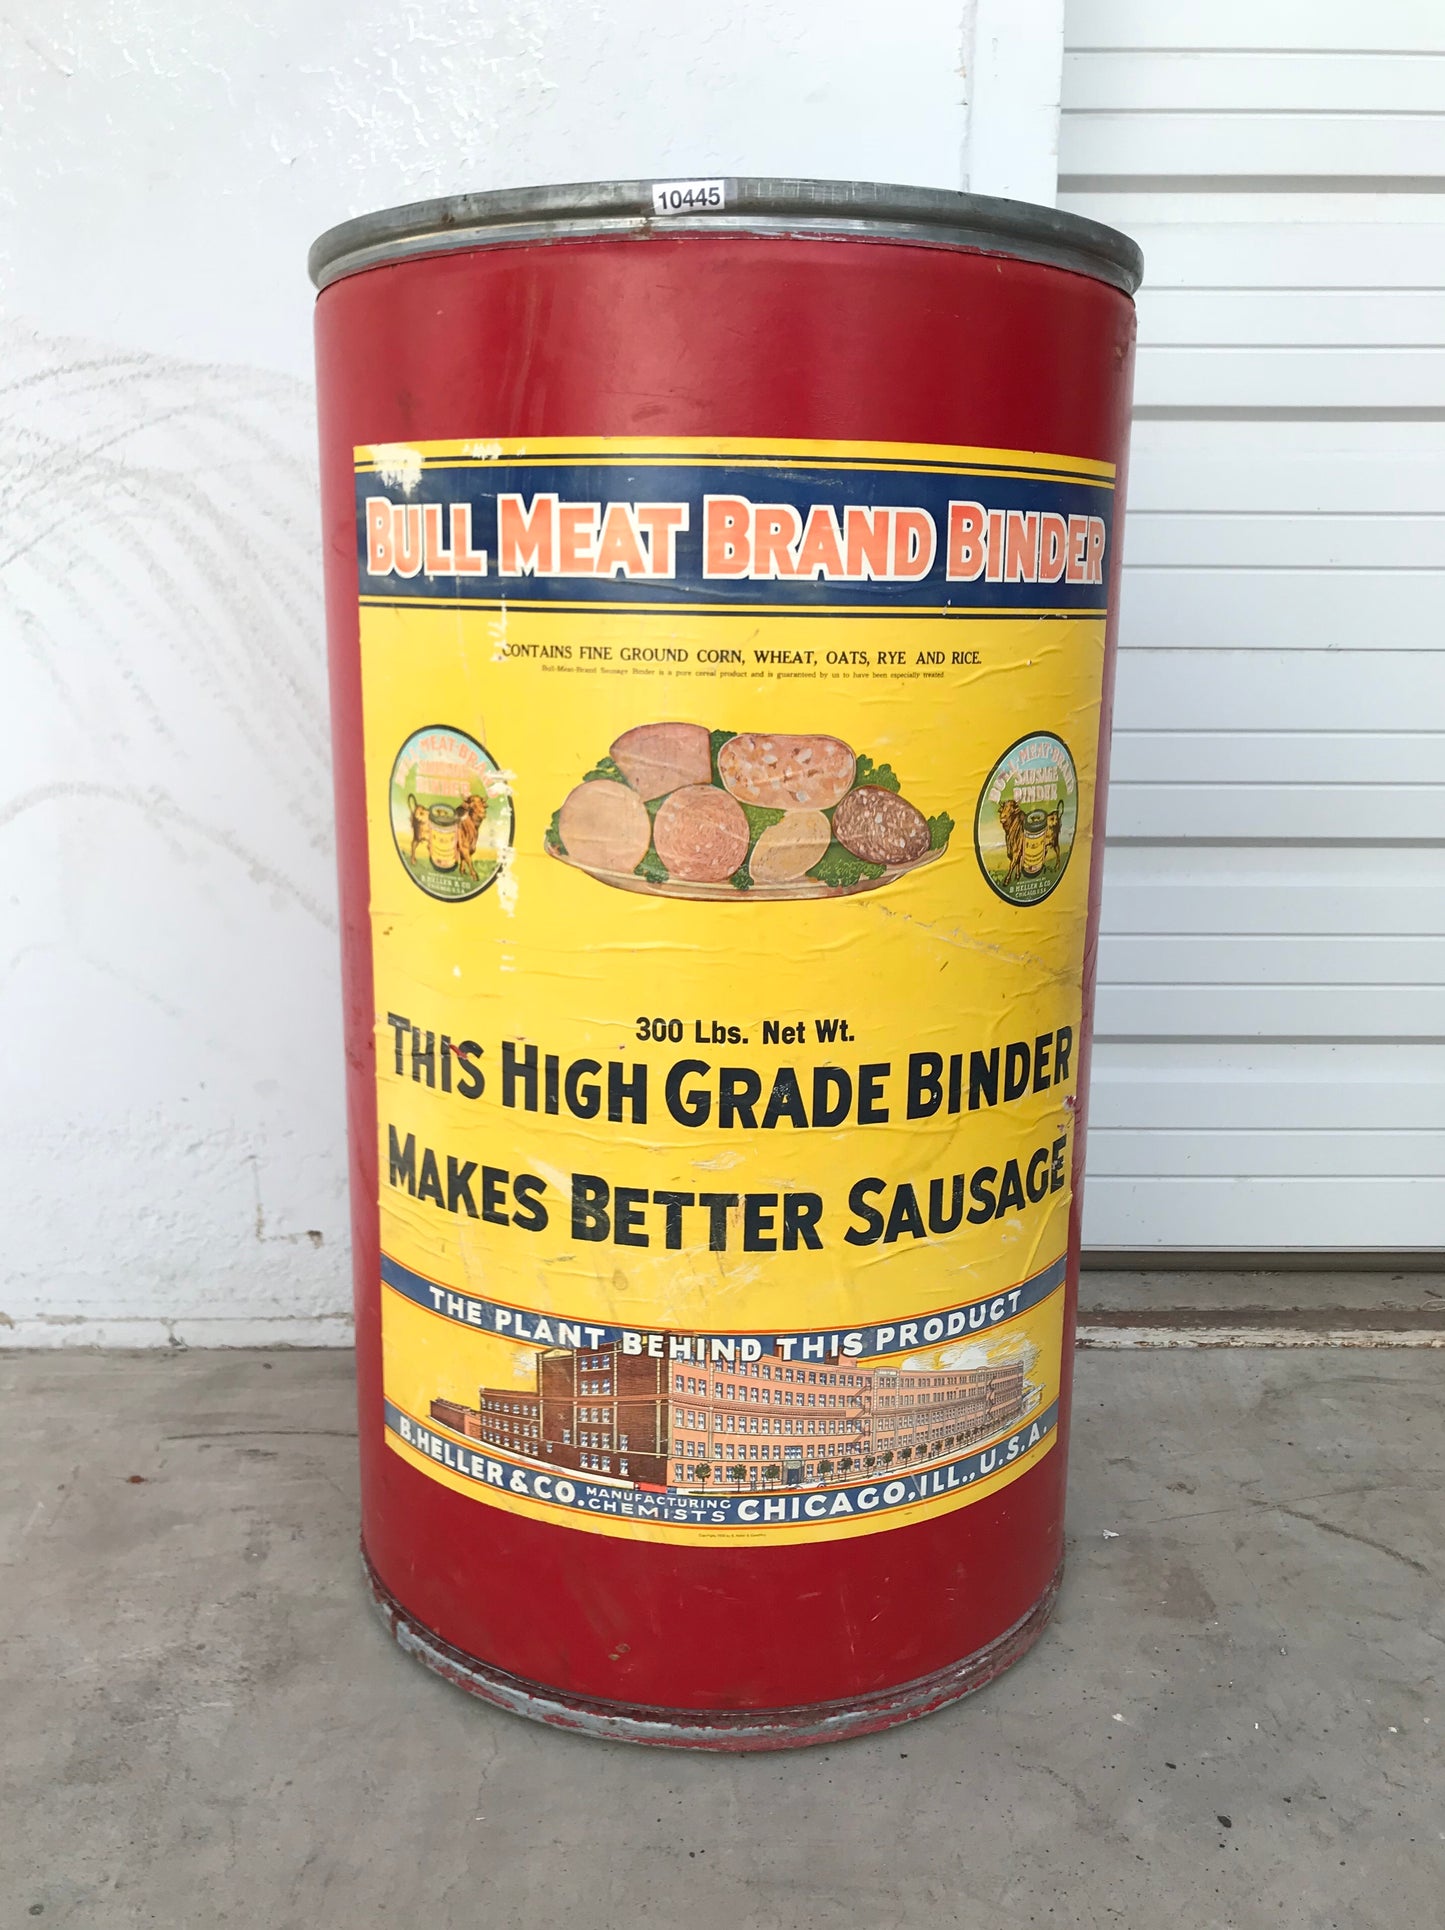 Bull Meat Brand Container (Retail/Restaurant)